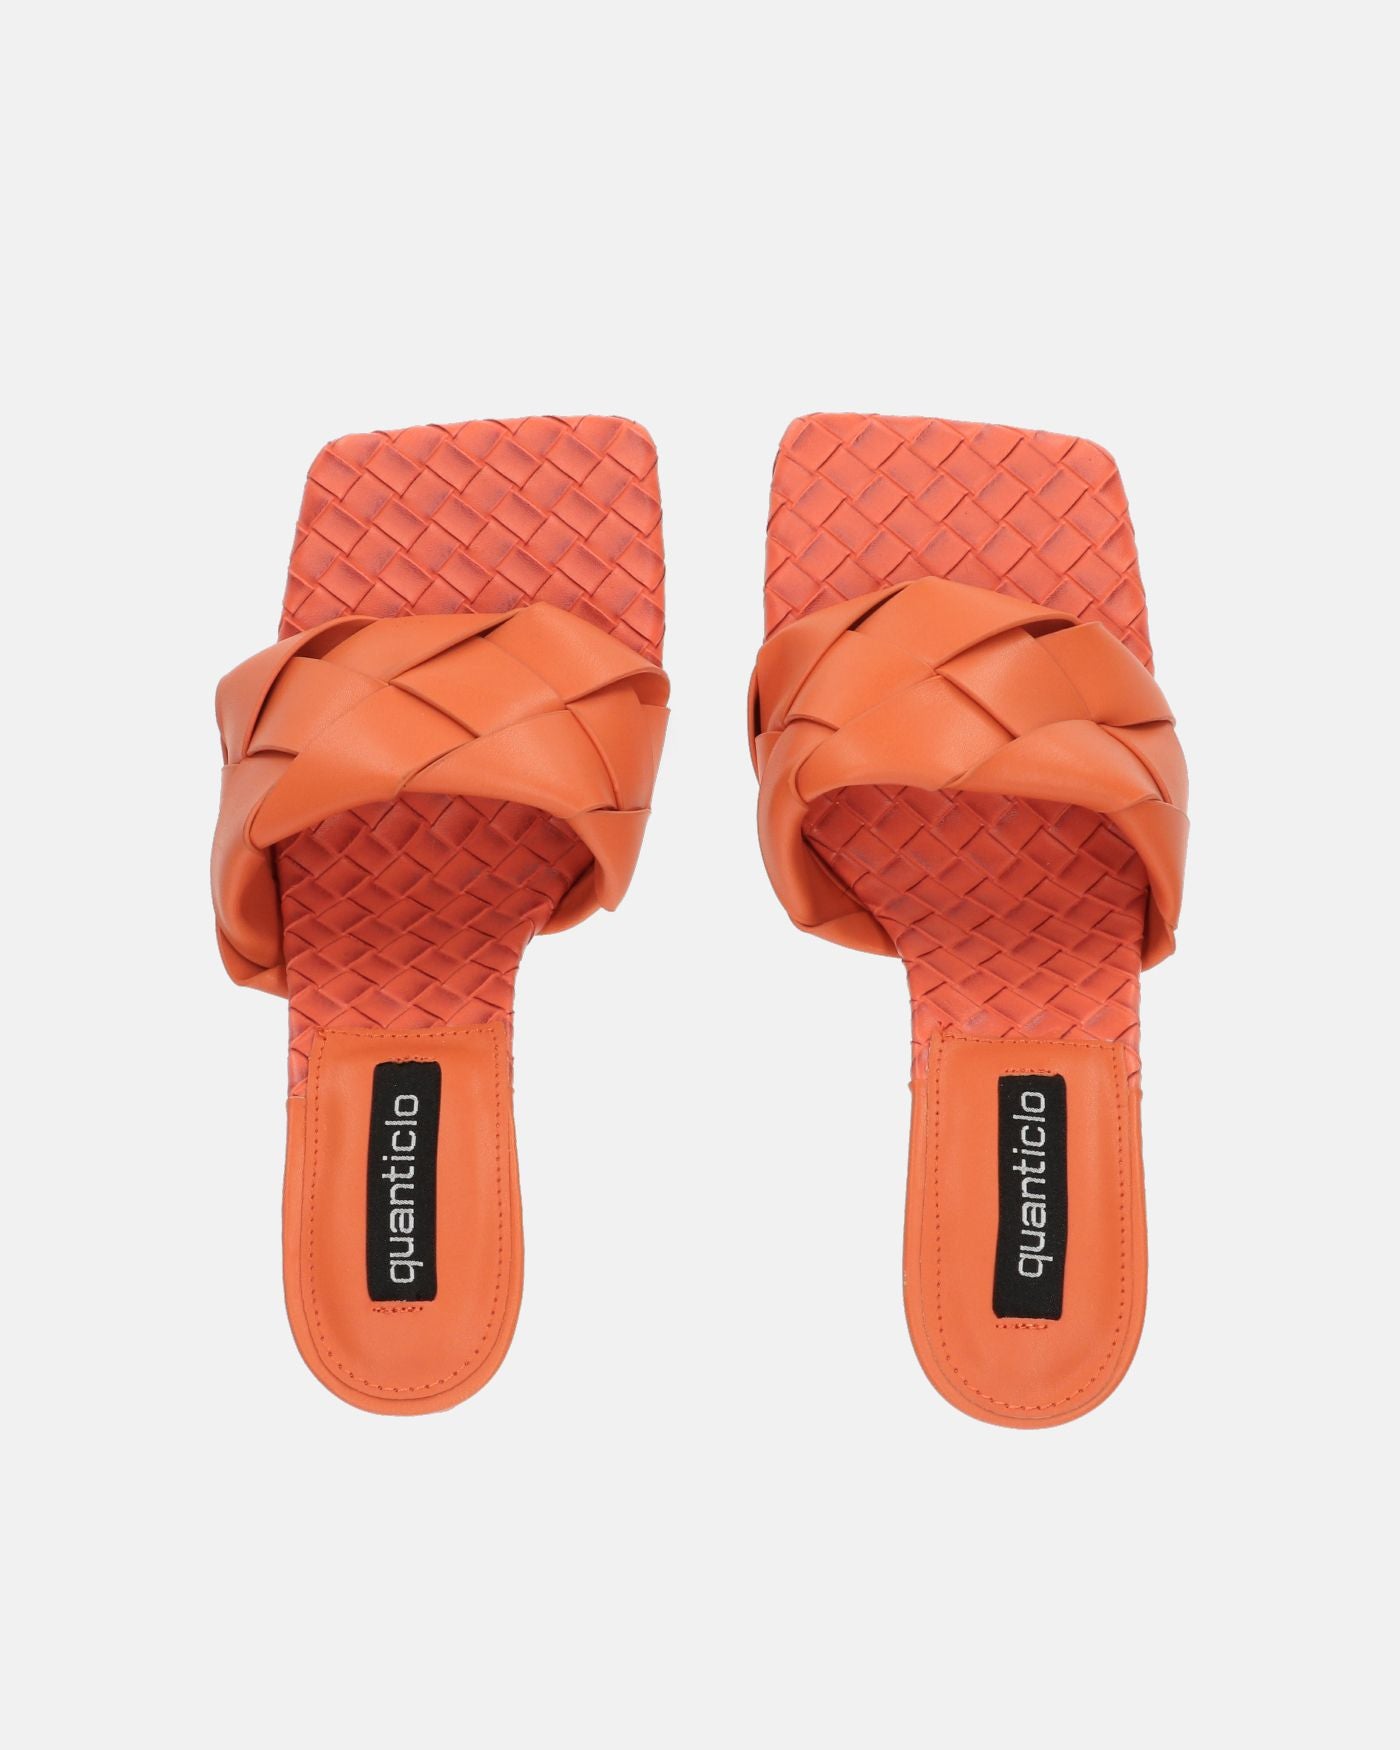 ENRICA - sandal in orange woven leather with heel